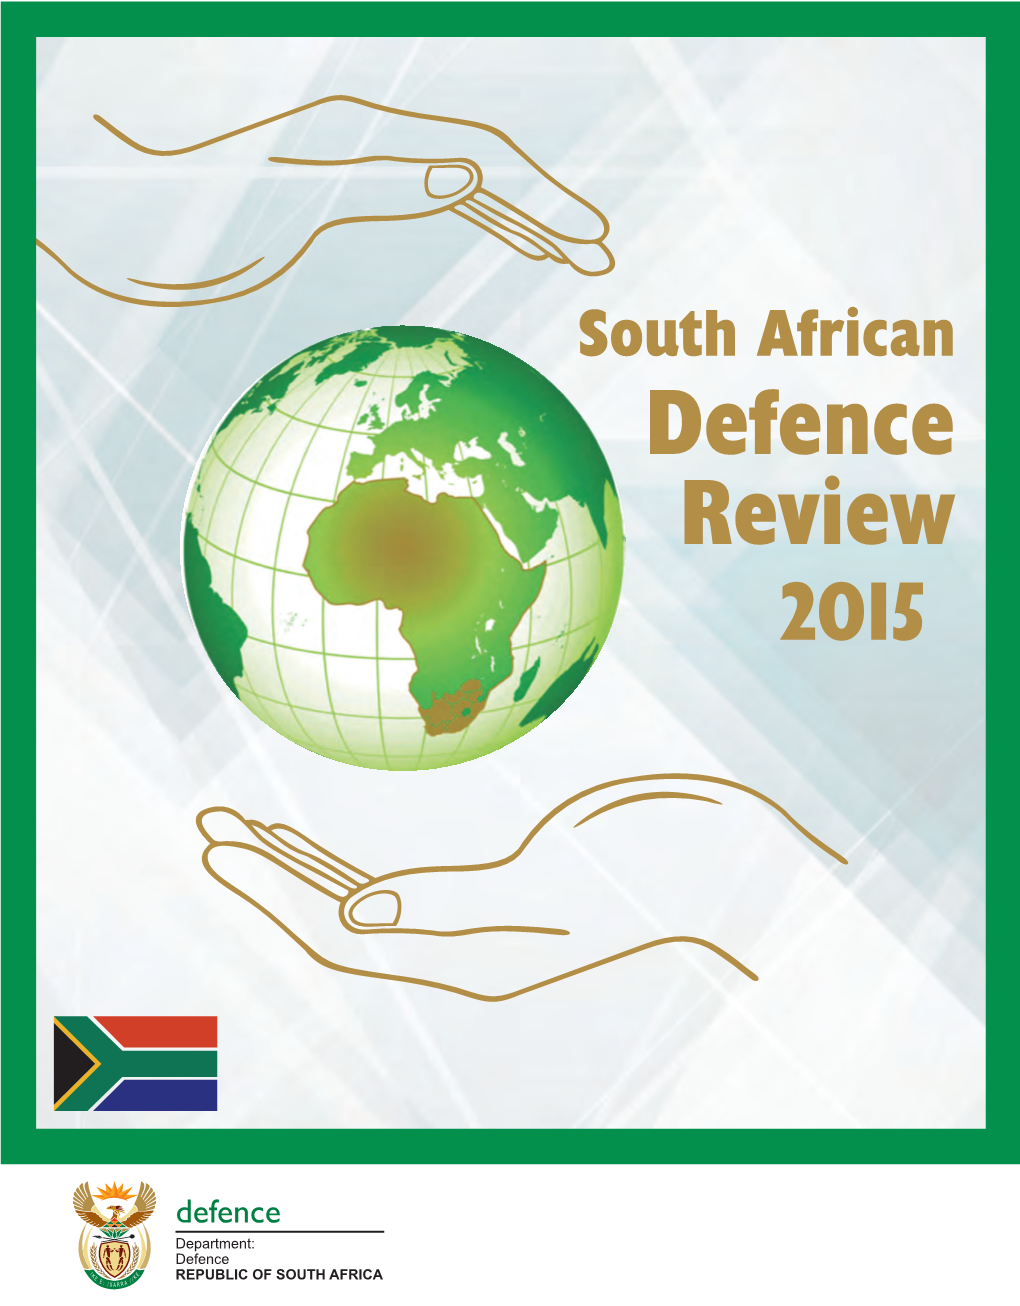 South African Defence Review 2015